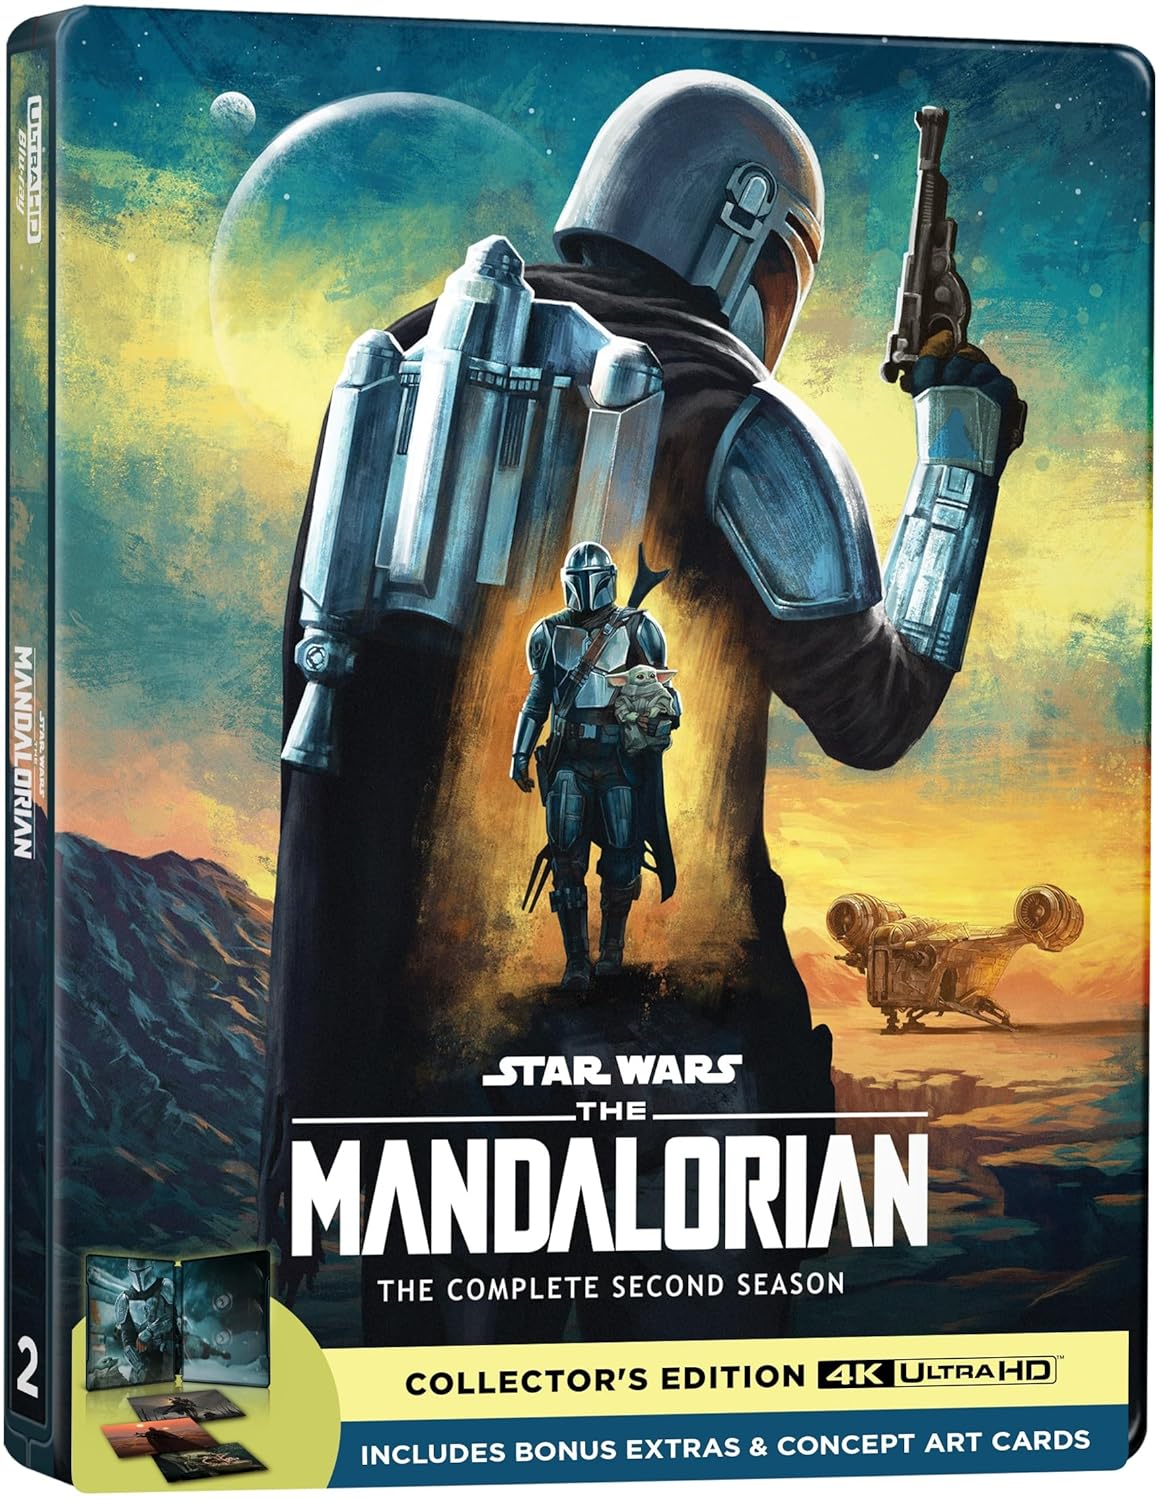 The Mandalorian: The Complete Second Season Limited Edition Lucasfilm 4K UHD Steelbook [PRE-ORDER]